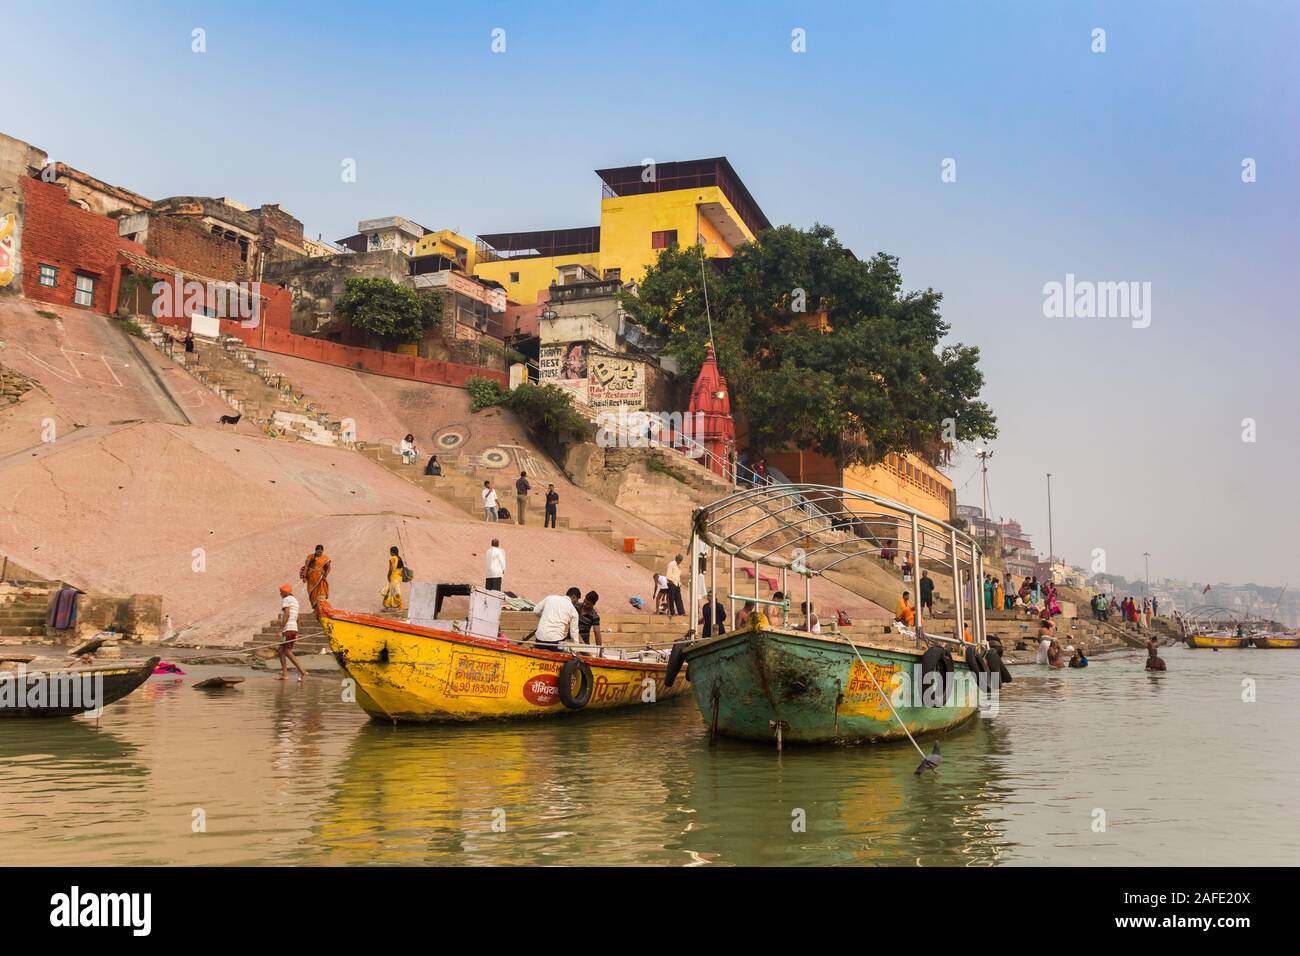 Colorful boats at the Ganges river in Varanasi, india Stock Photo